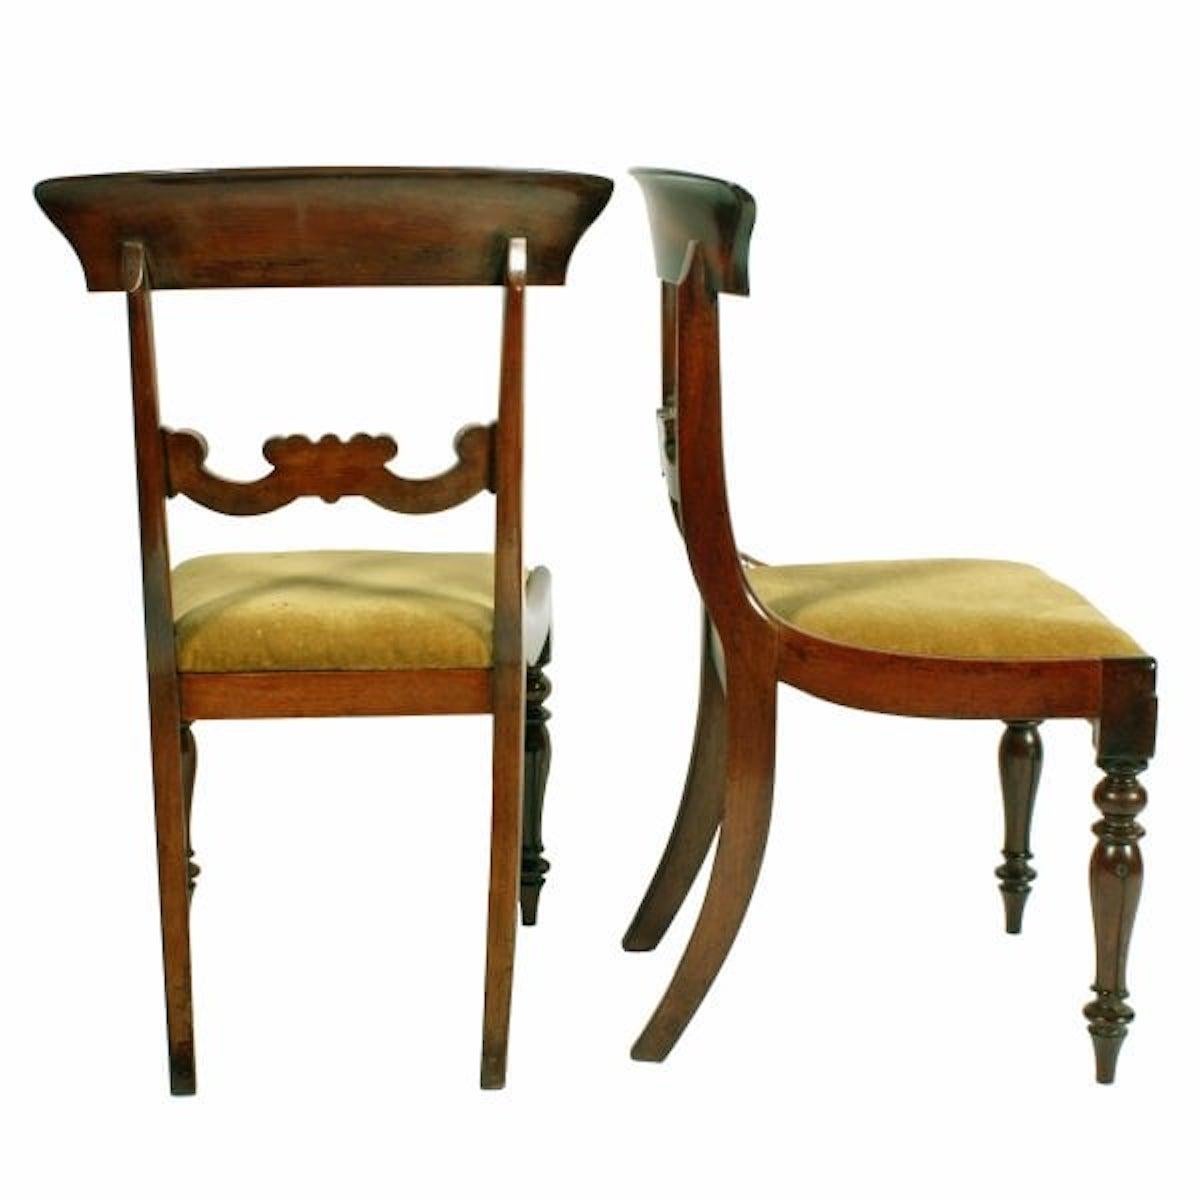 Set of Six Mahogany Chairs

A set of six mid 19th century Victorian mahogany dining chairs.

The chairs have a broad curved top rail to the back with a carved scroll centre rail.

The front legs are turned and lappet carved while the back legs